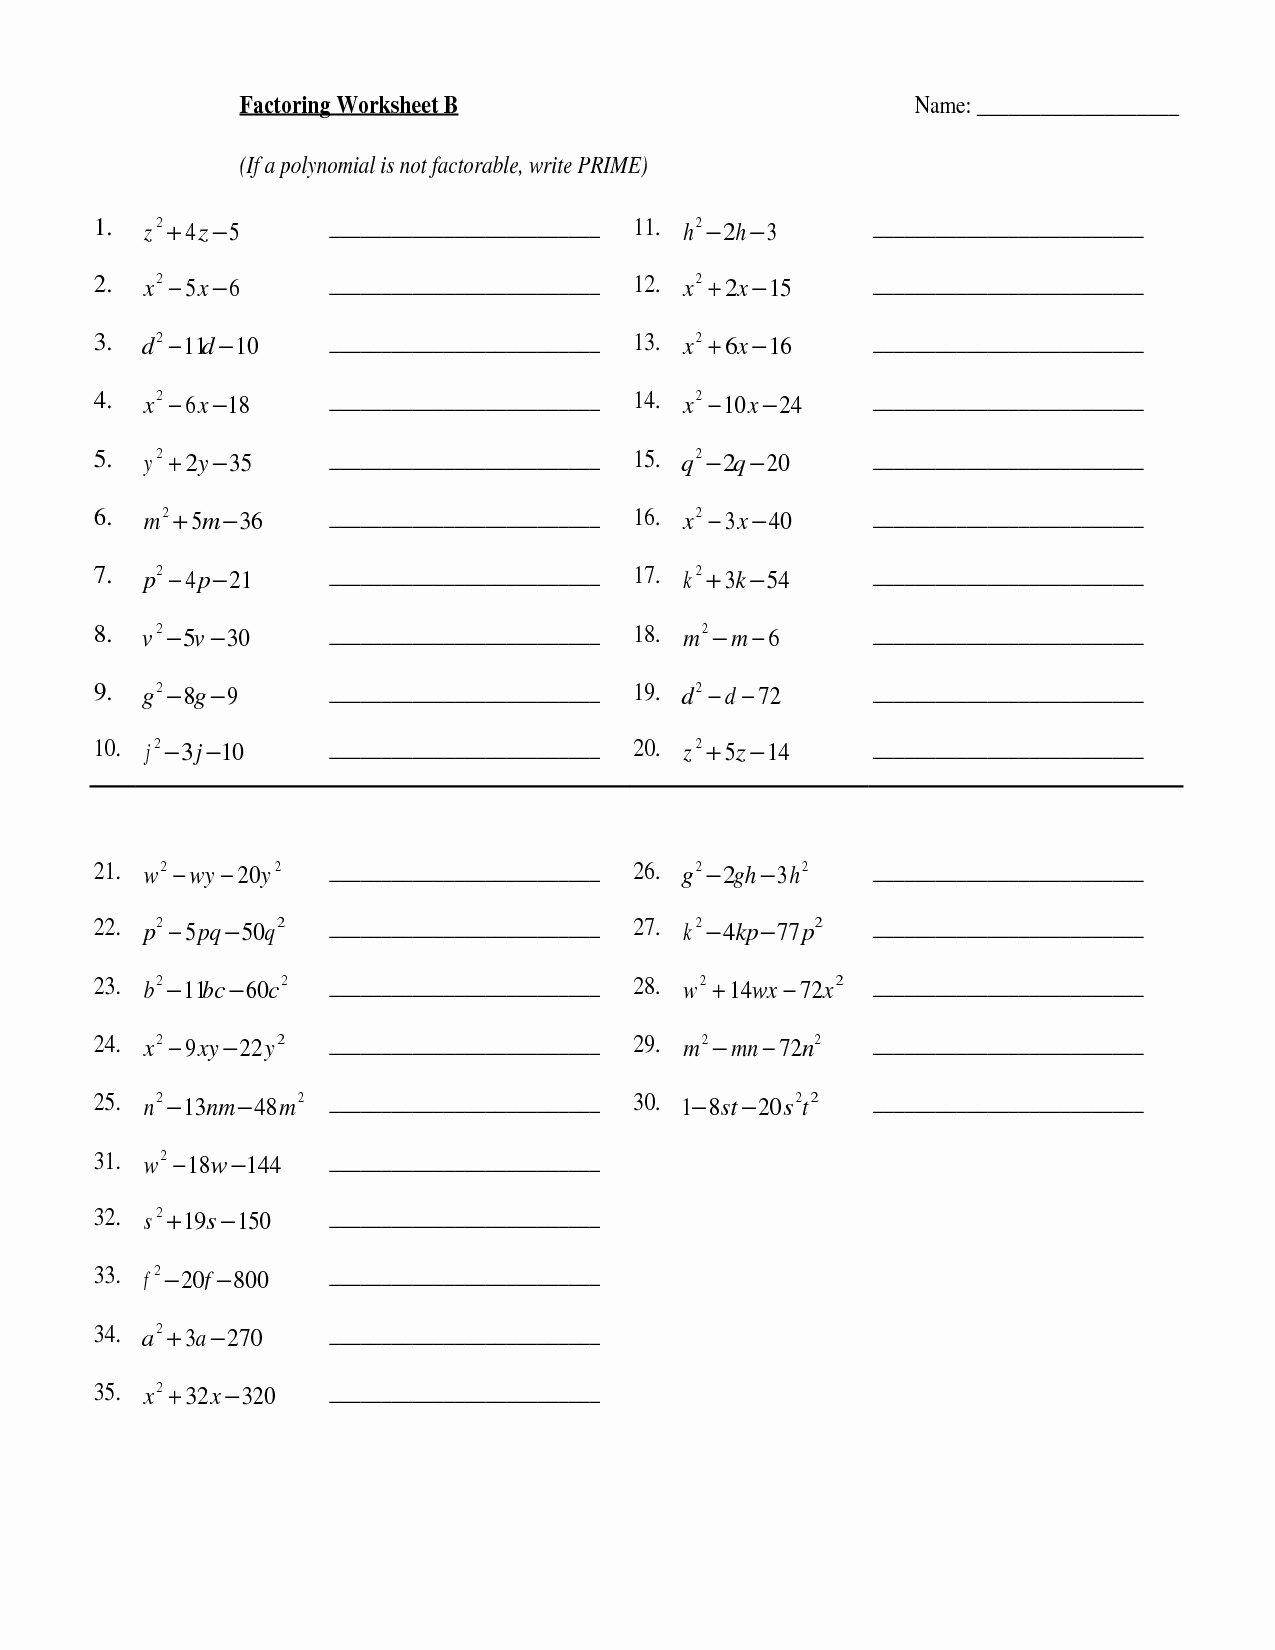 Factoring Polynomials Worksheet with Answers Inspirational 12 Best Of Factoring Out Monomials Worksheets